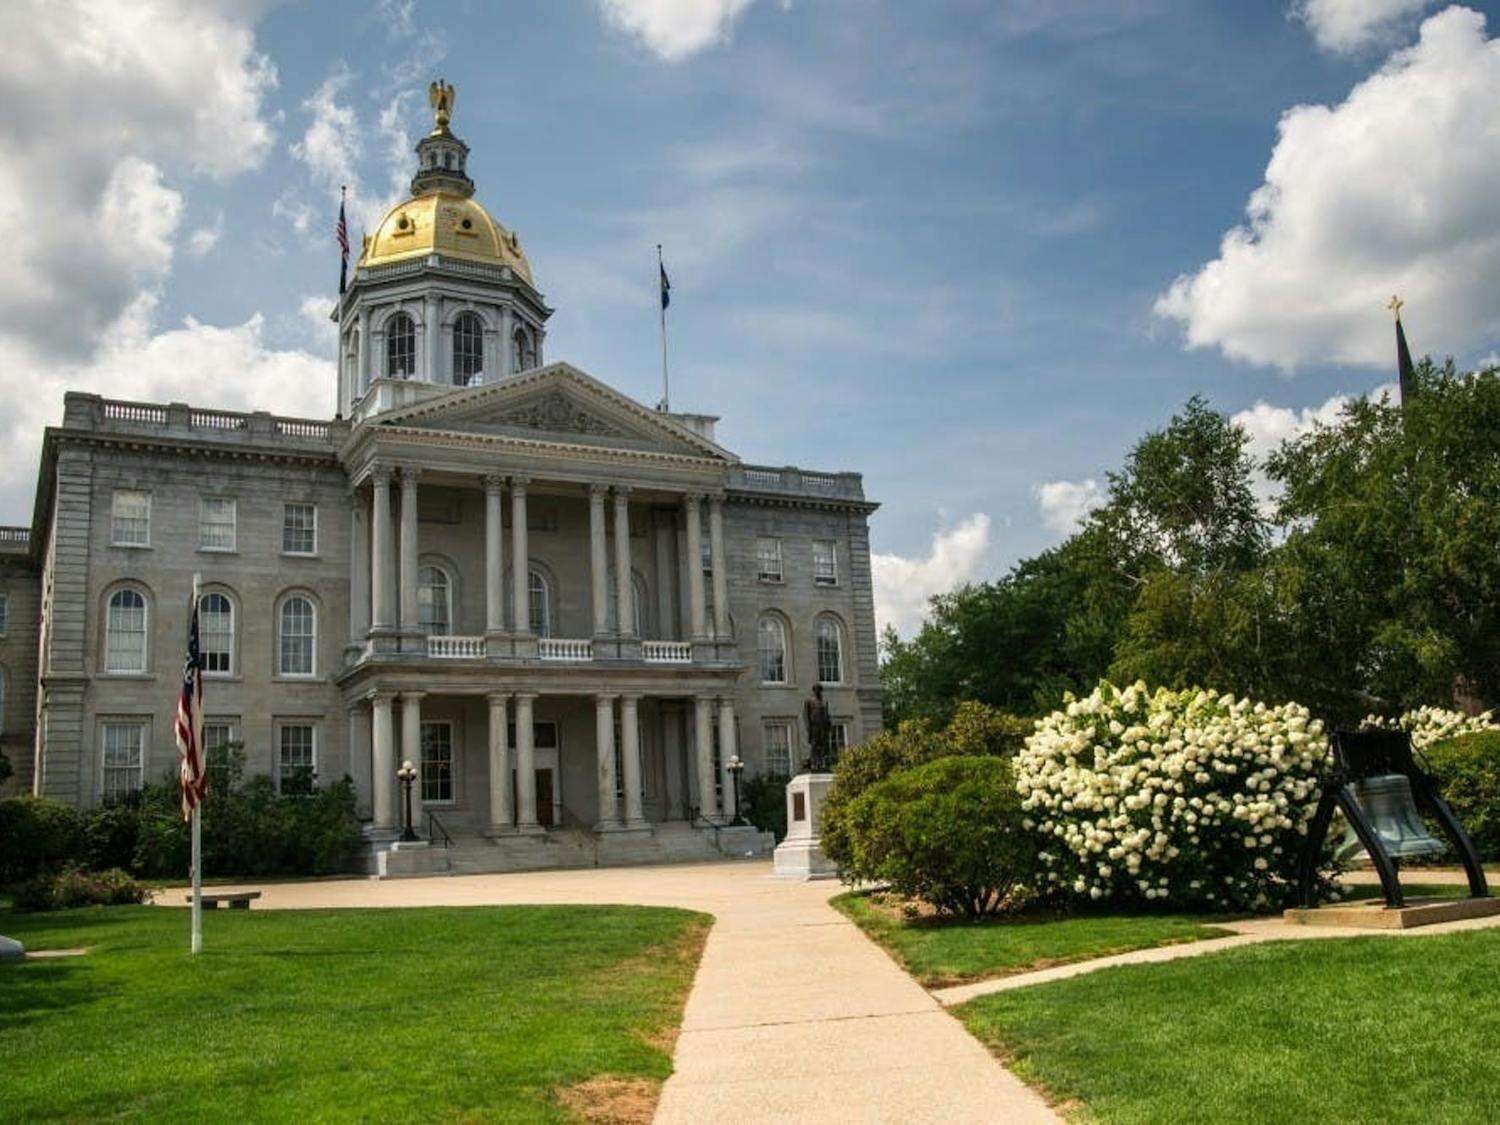 While voting rights activists claim victory, they warn that other bills currently being considered in the New Hampshire legislature may still attempt to restrict voting.